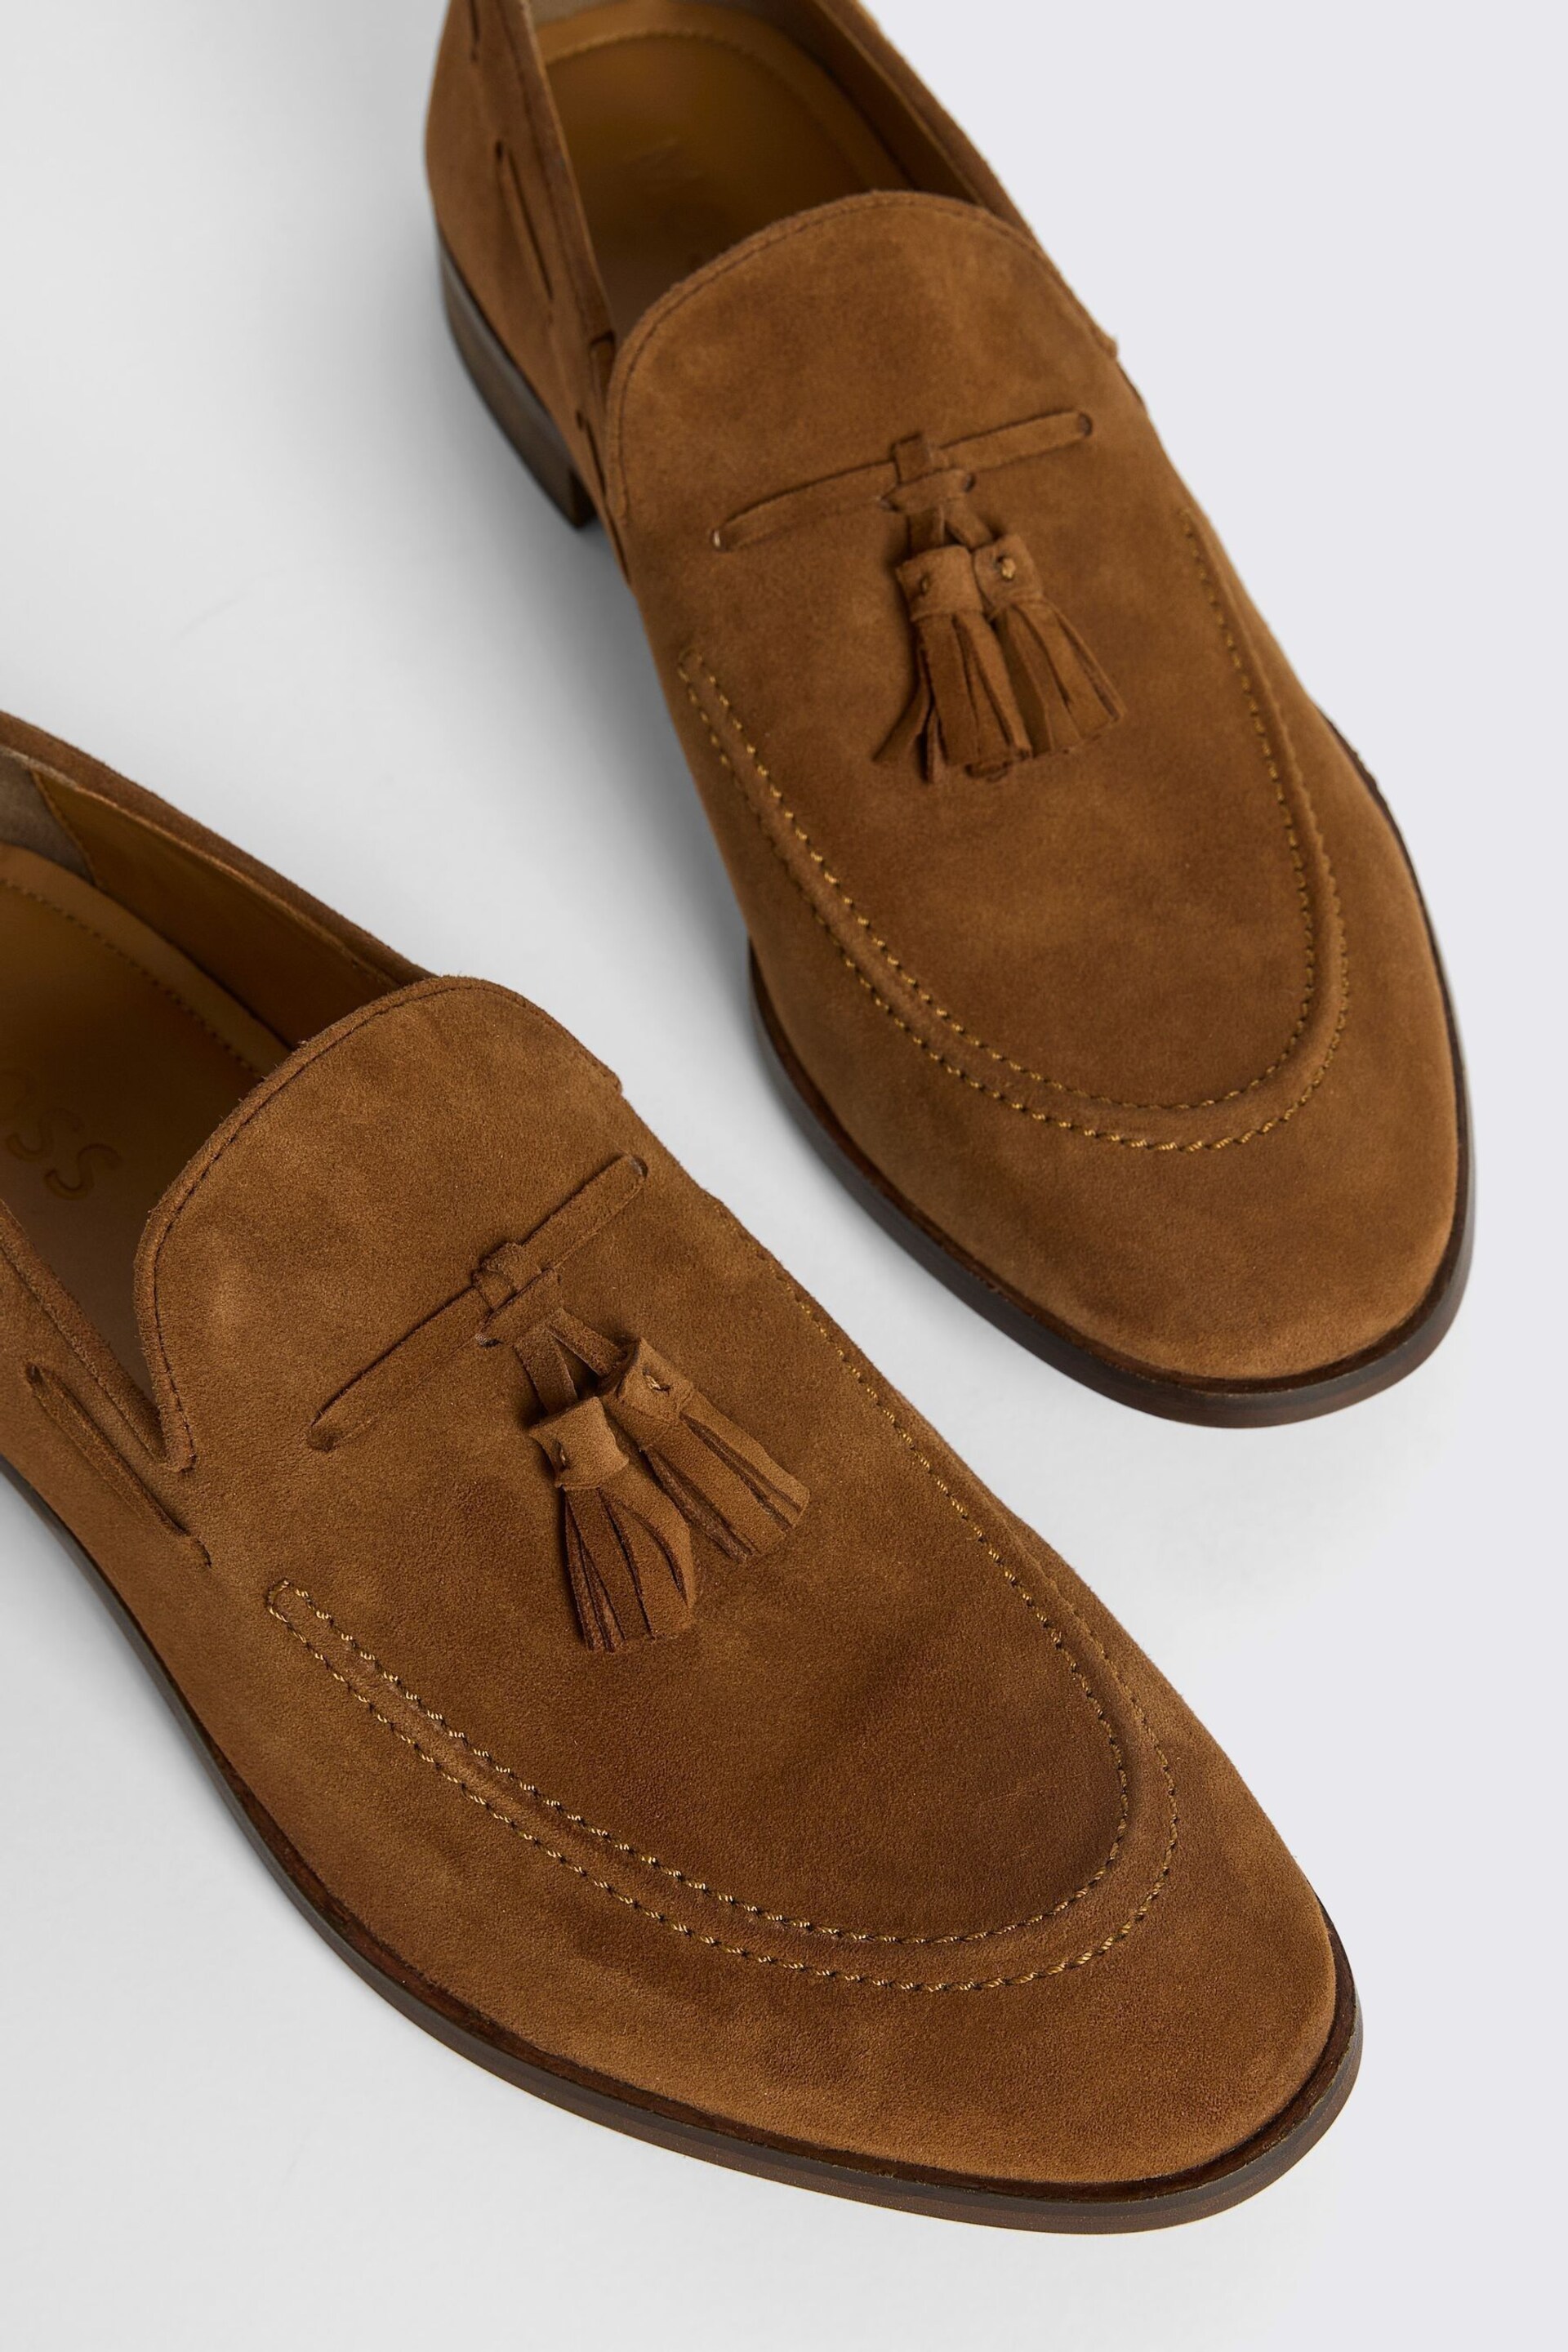 MOSS Tan Brown Highgate Suede Tassel Loafers - Image 3 of 5